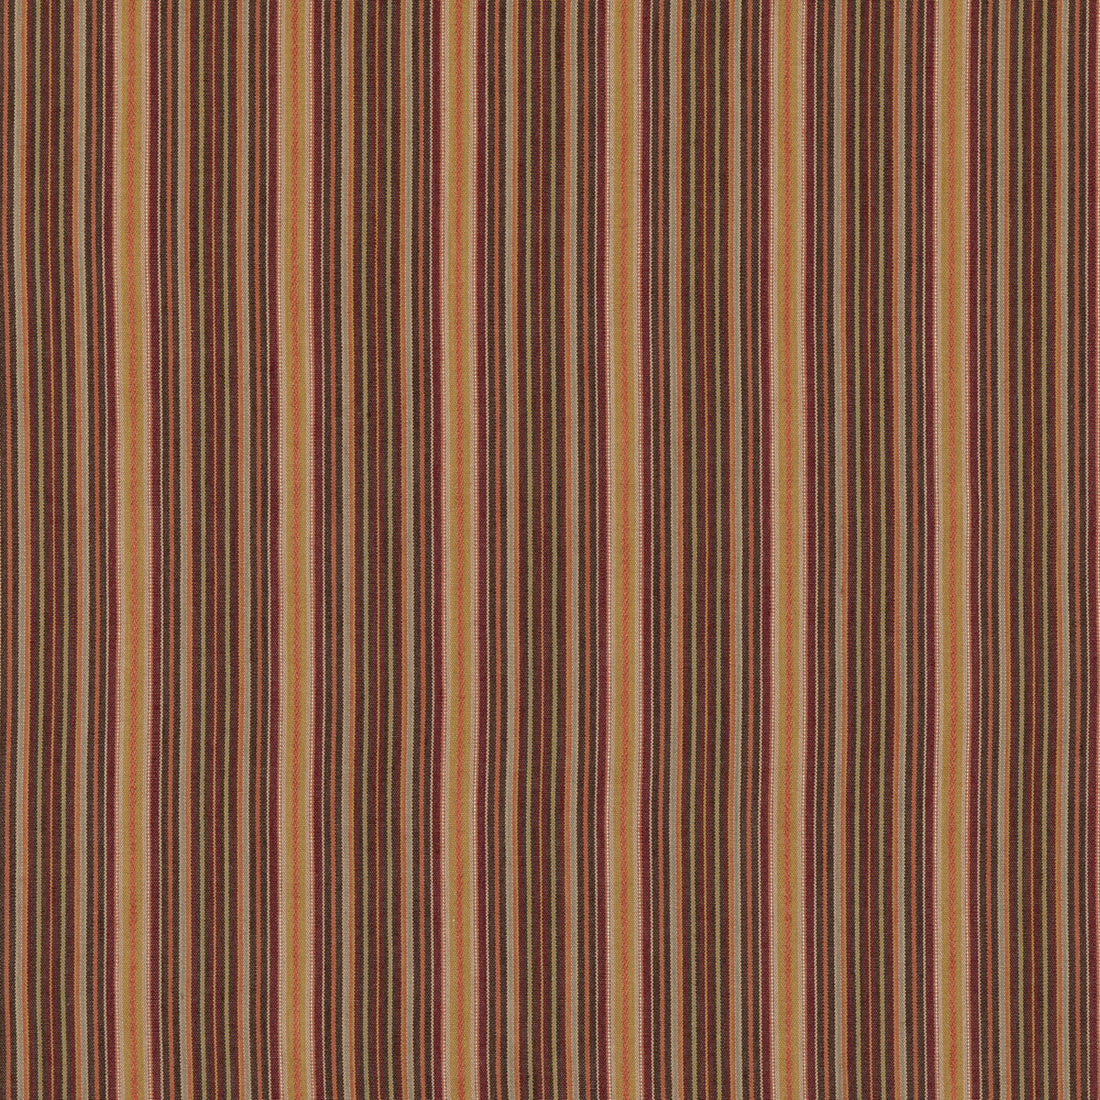 Falconer Stripe fabric in spice color - pattern FD789.T30.0 - by Mulberry in the Mulberry Stripes II collection